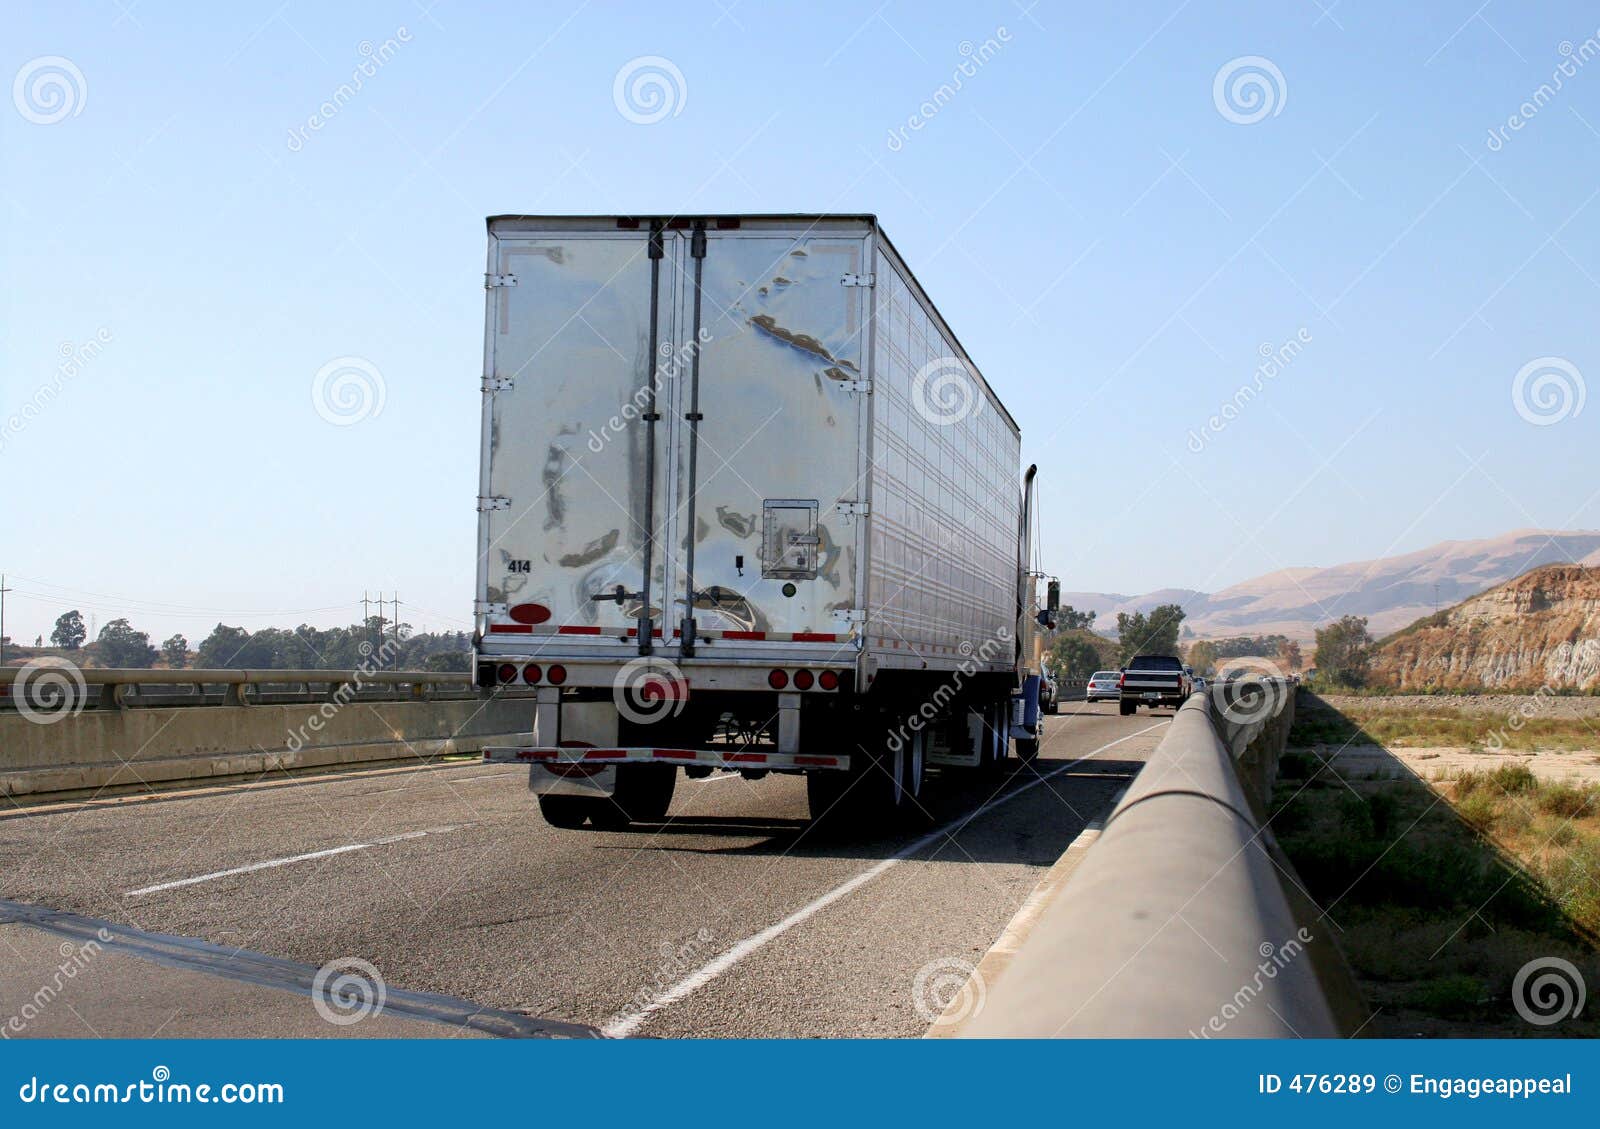 Semi Truck On Freeway Royalty Free Stock Images  Image: 476289